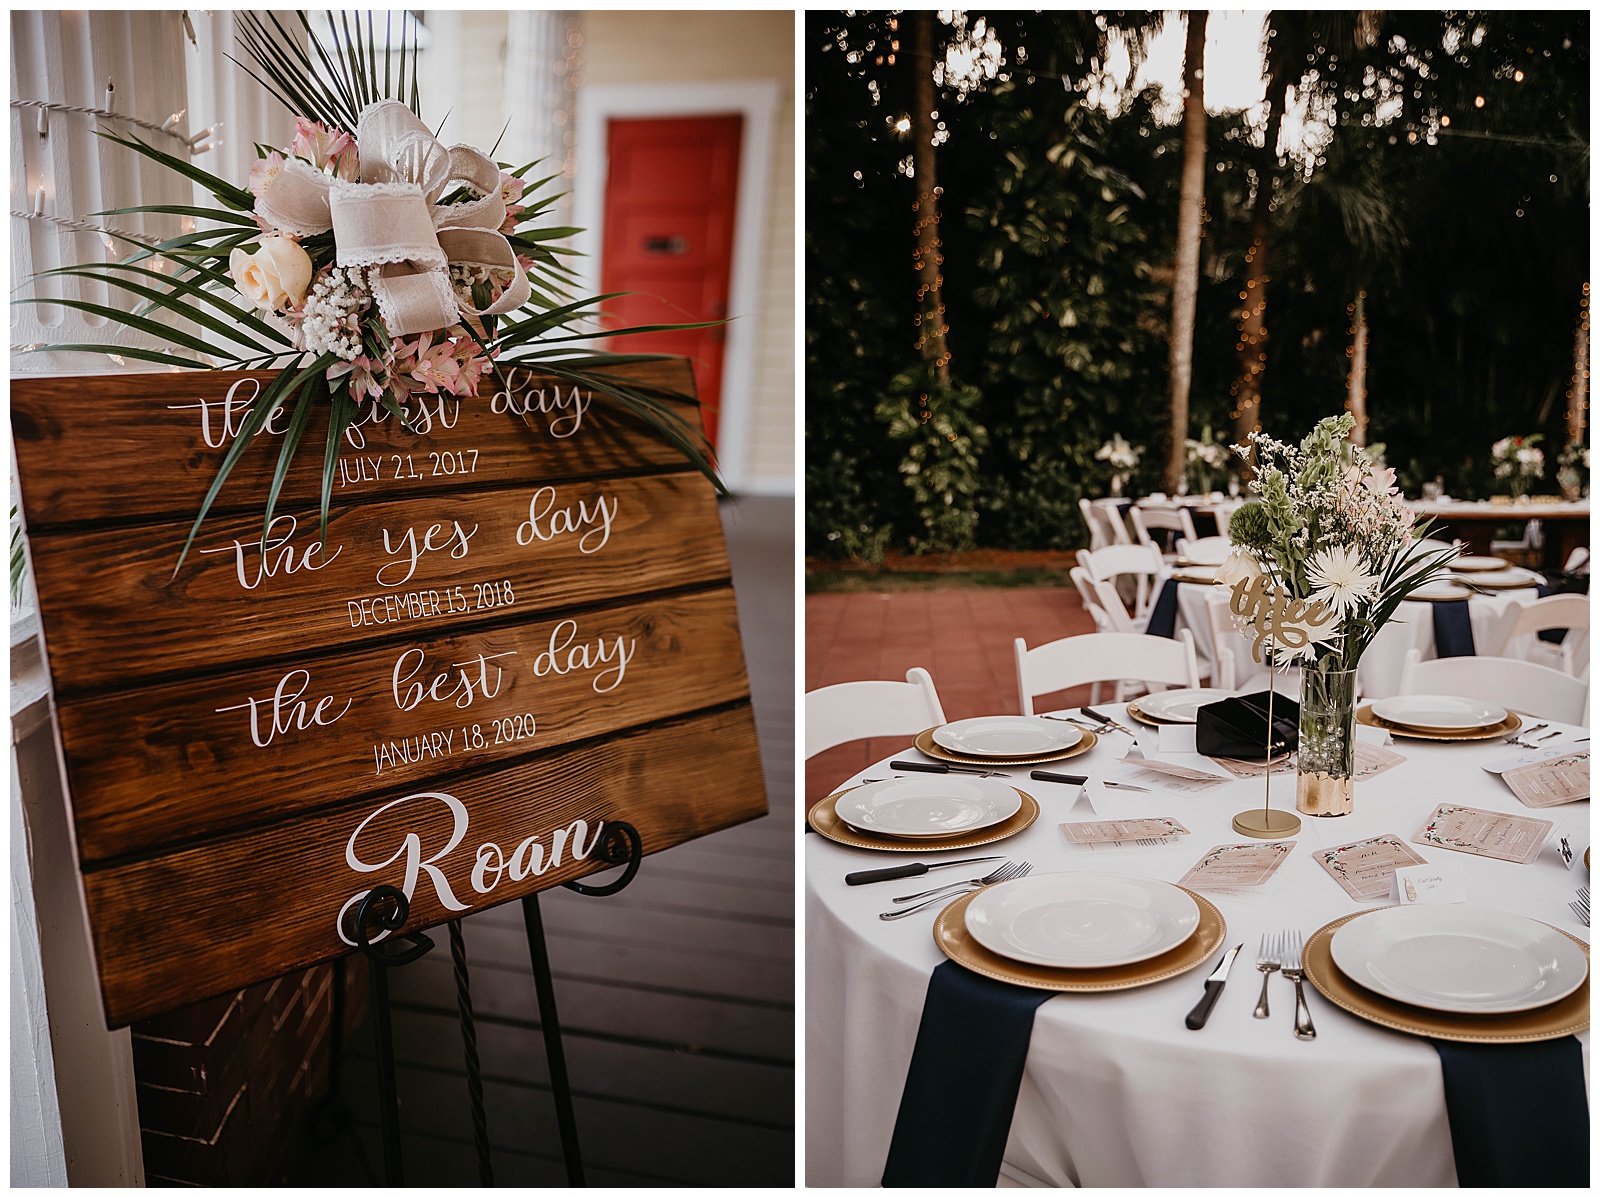 Wedding Reception Details at the Heitman House